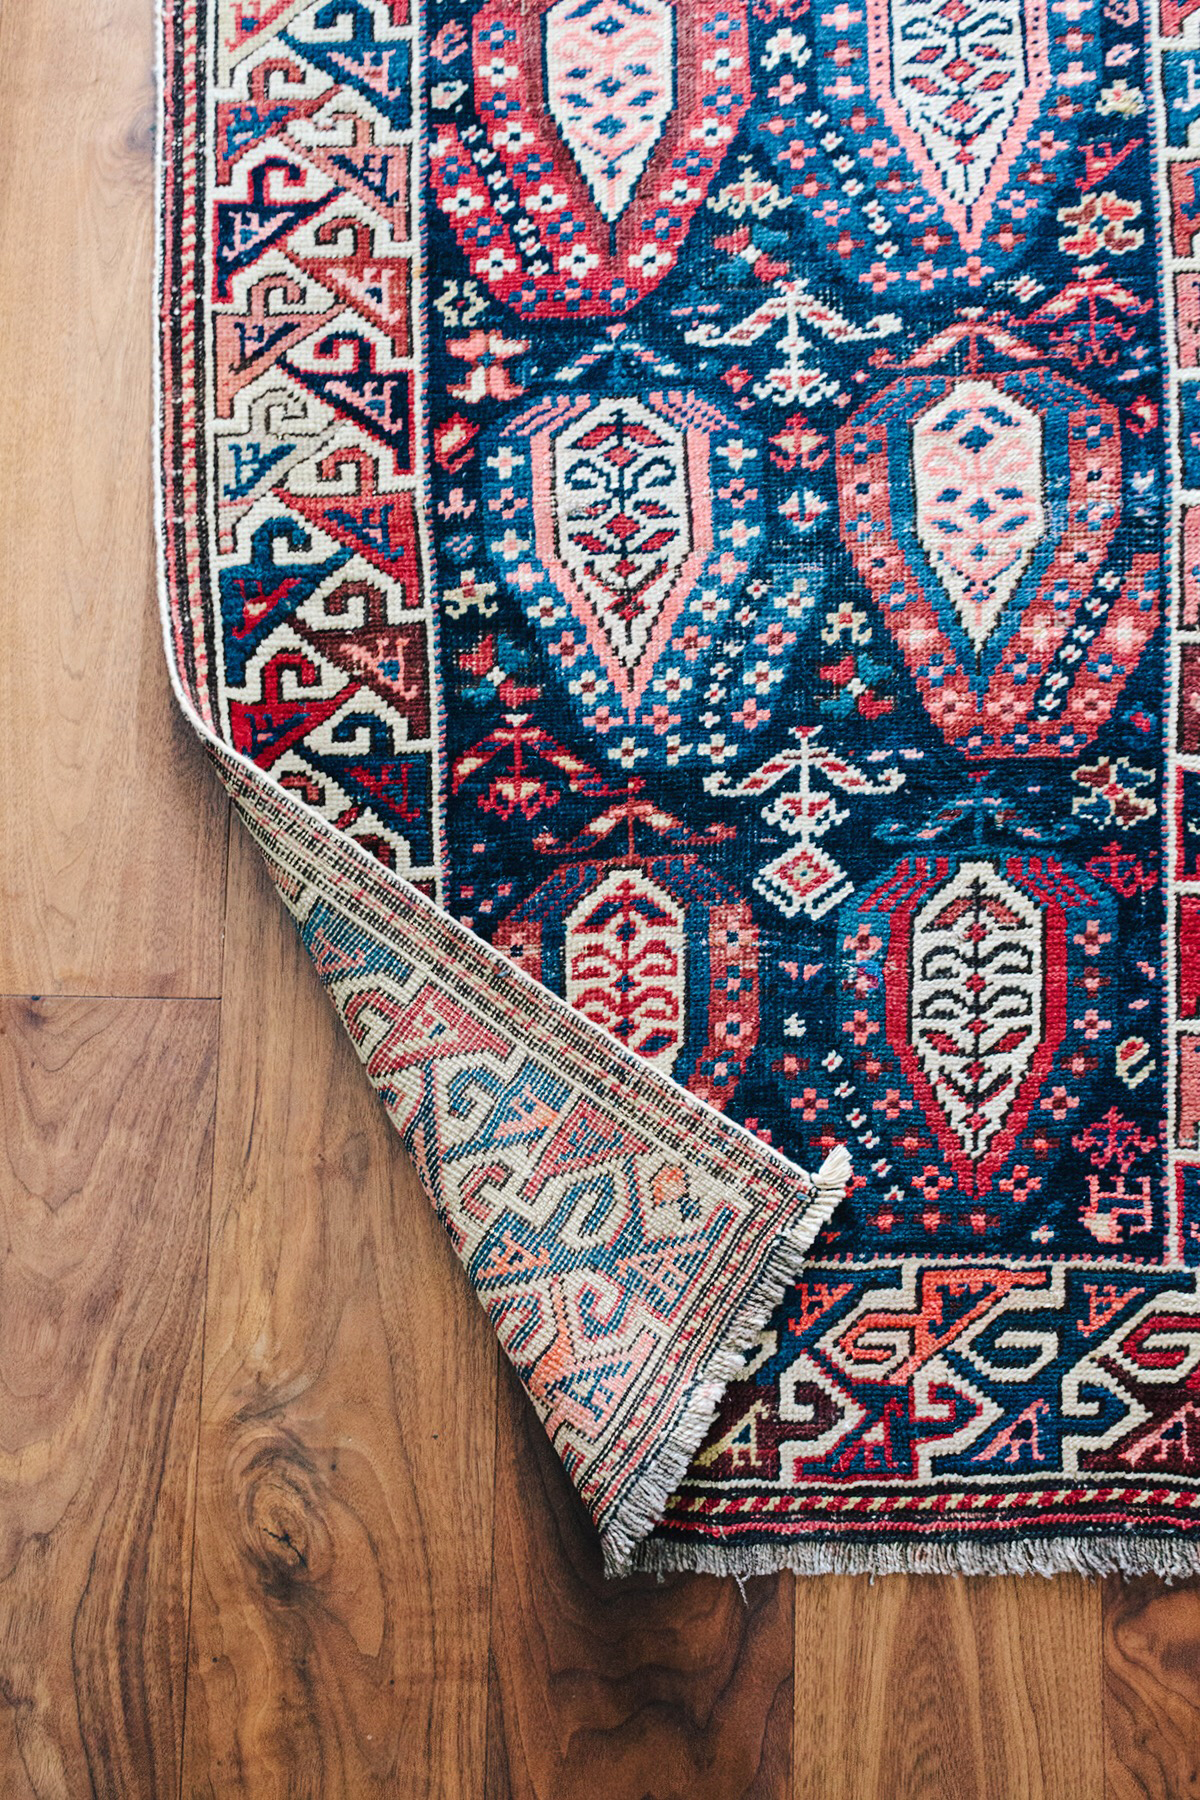 Finding The Right Antique Rug - Honestly WTF